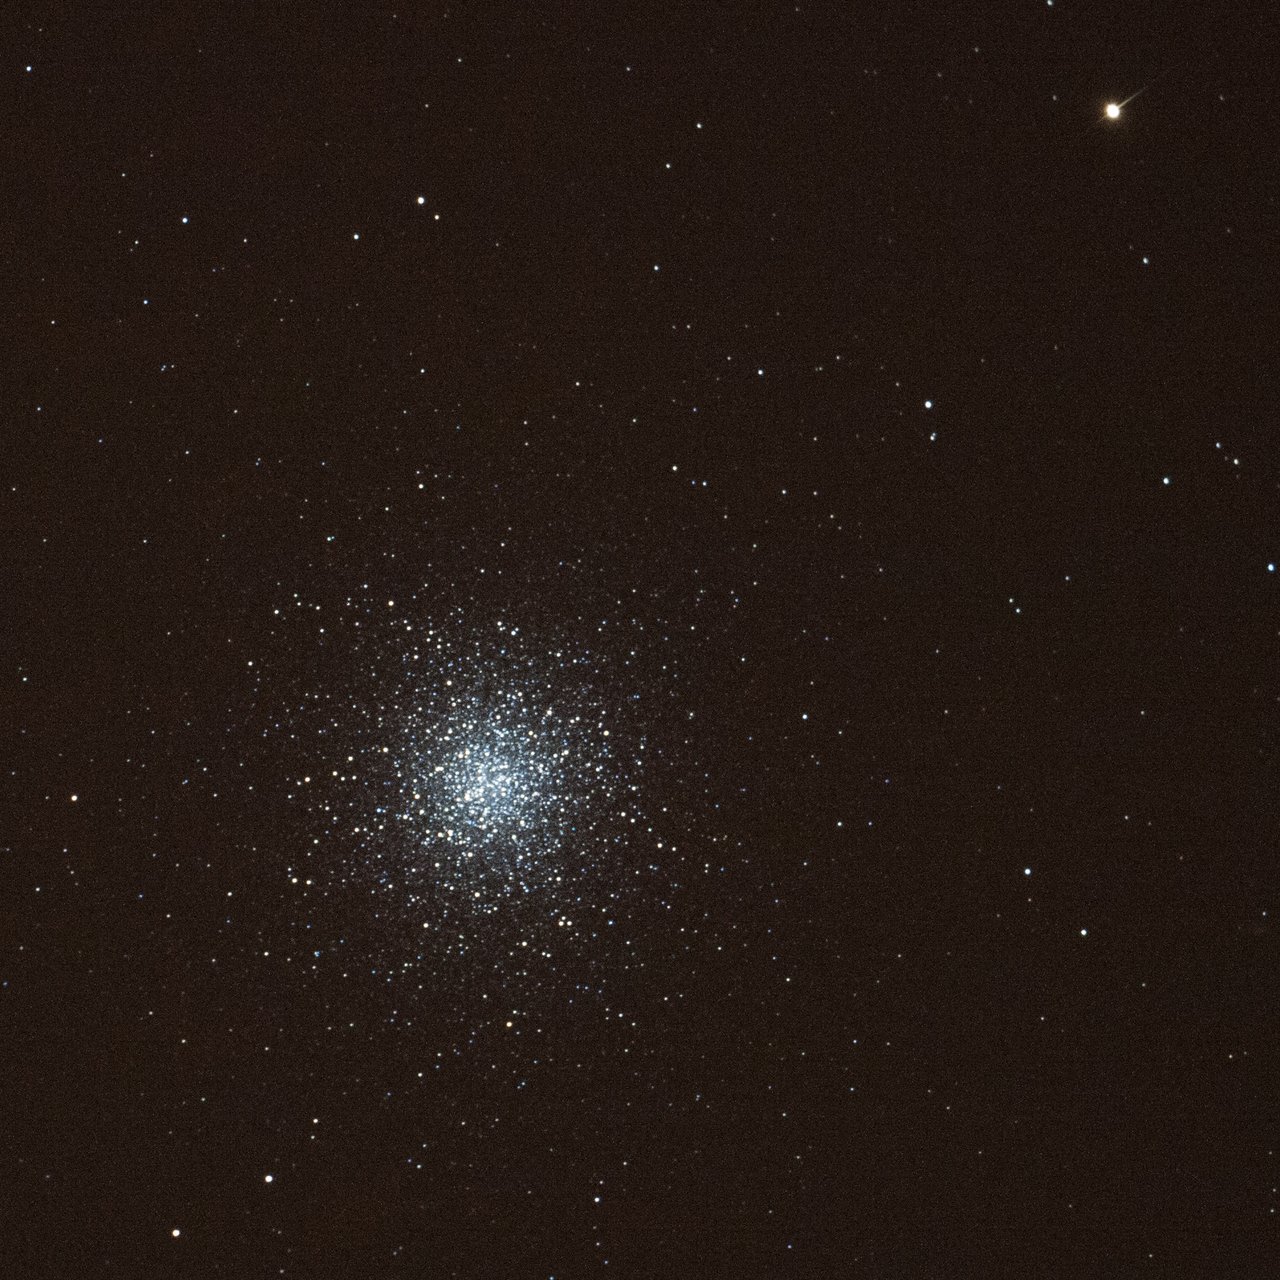 Messier 13, a star cluster